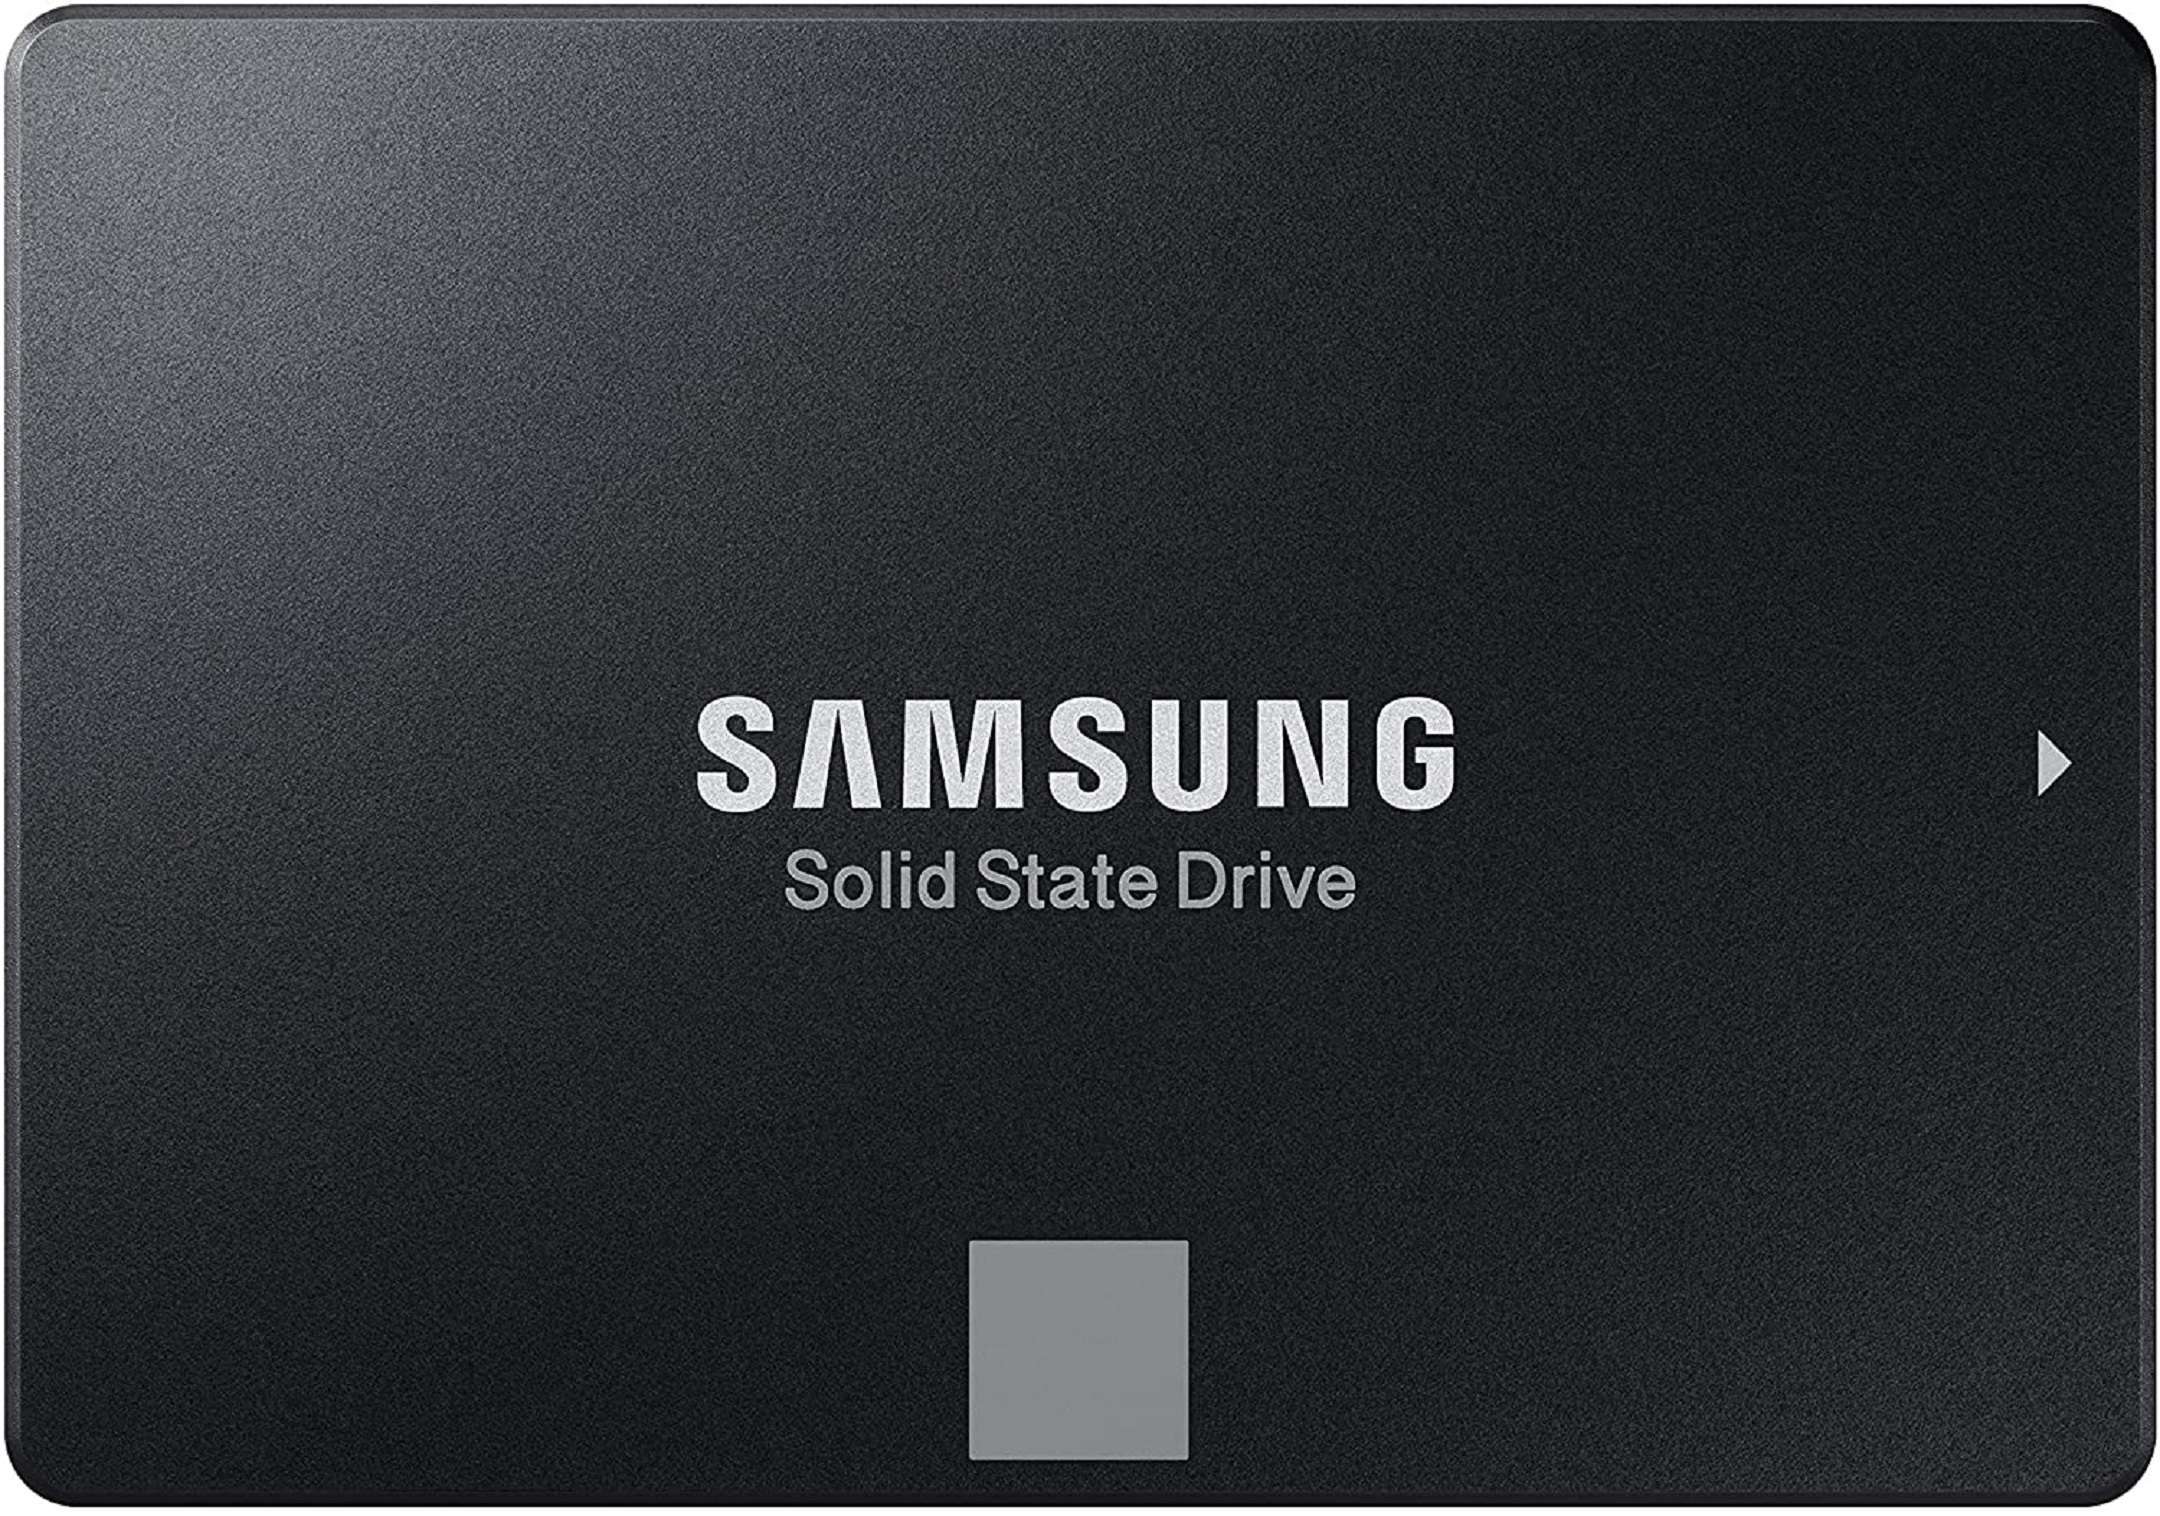 Samsung 860 EVO SSD of 250 and 500 GB on offer